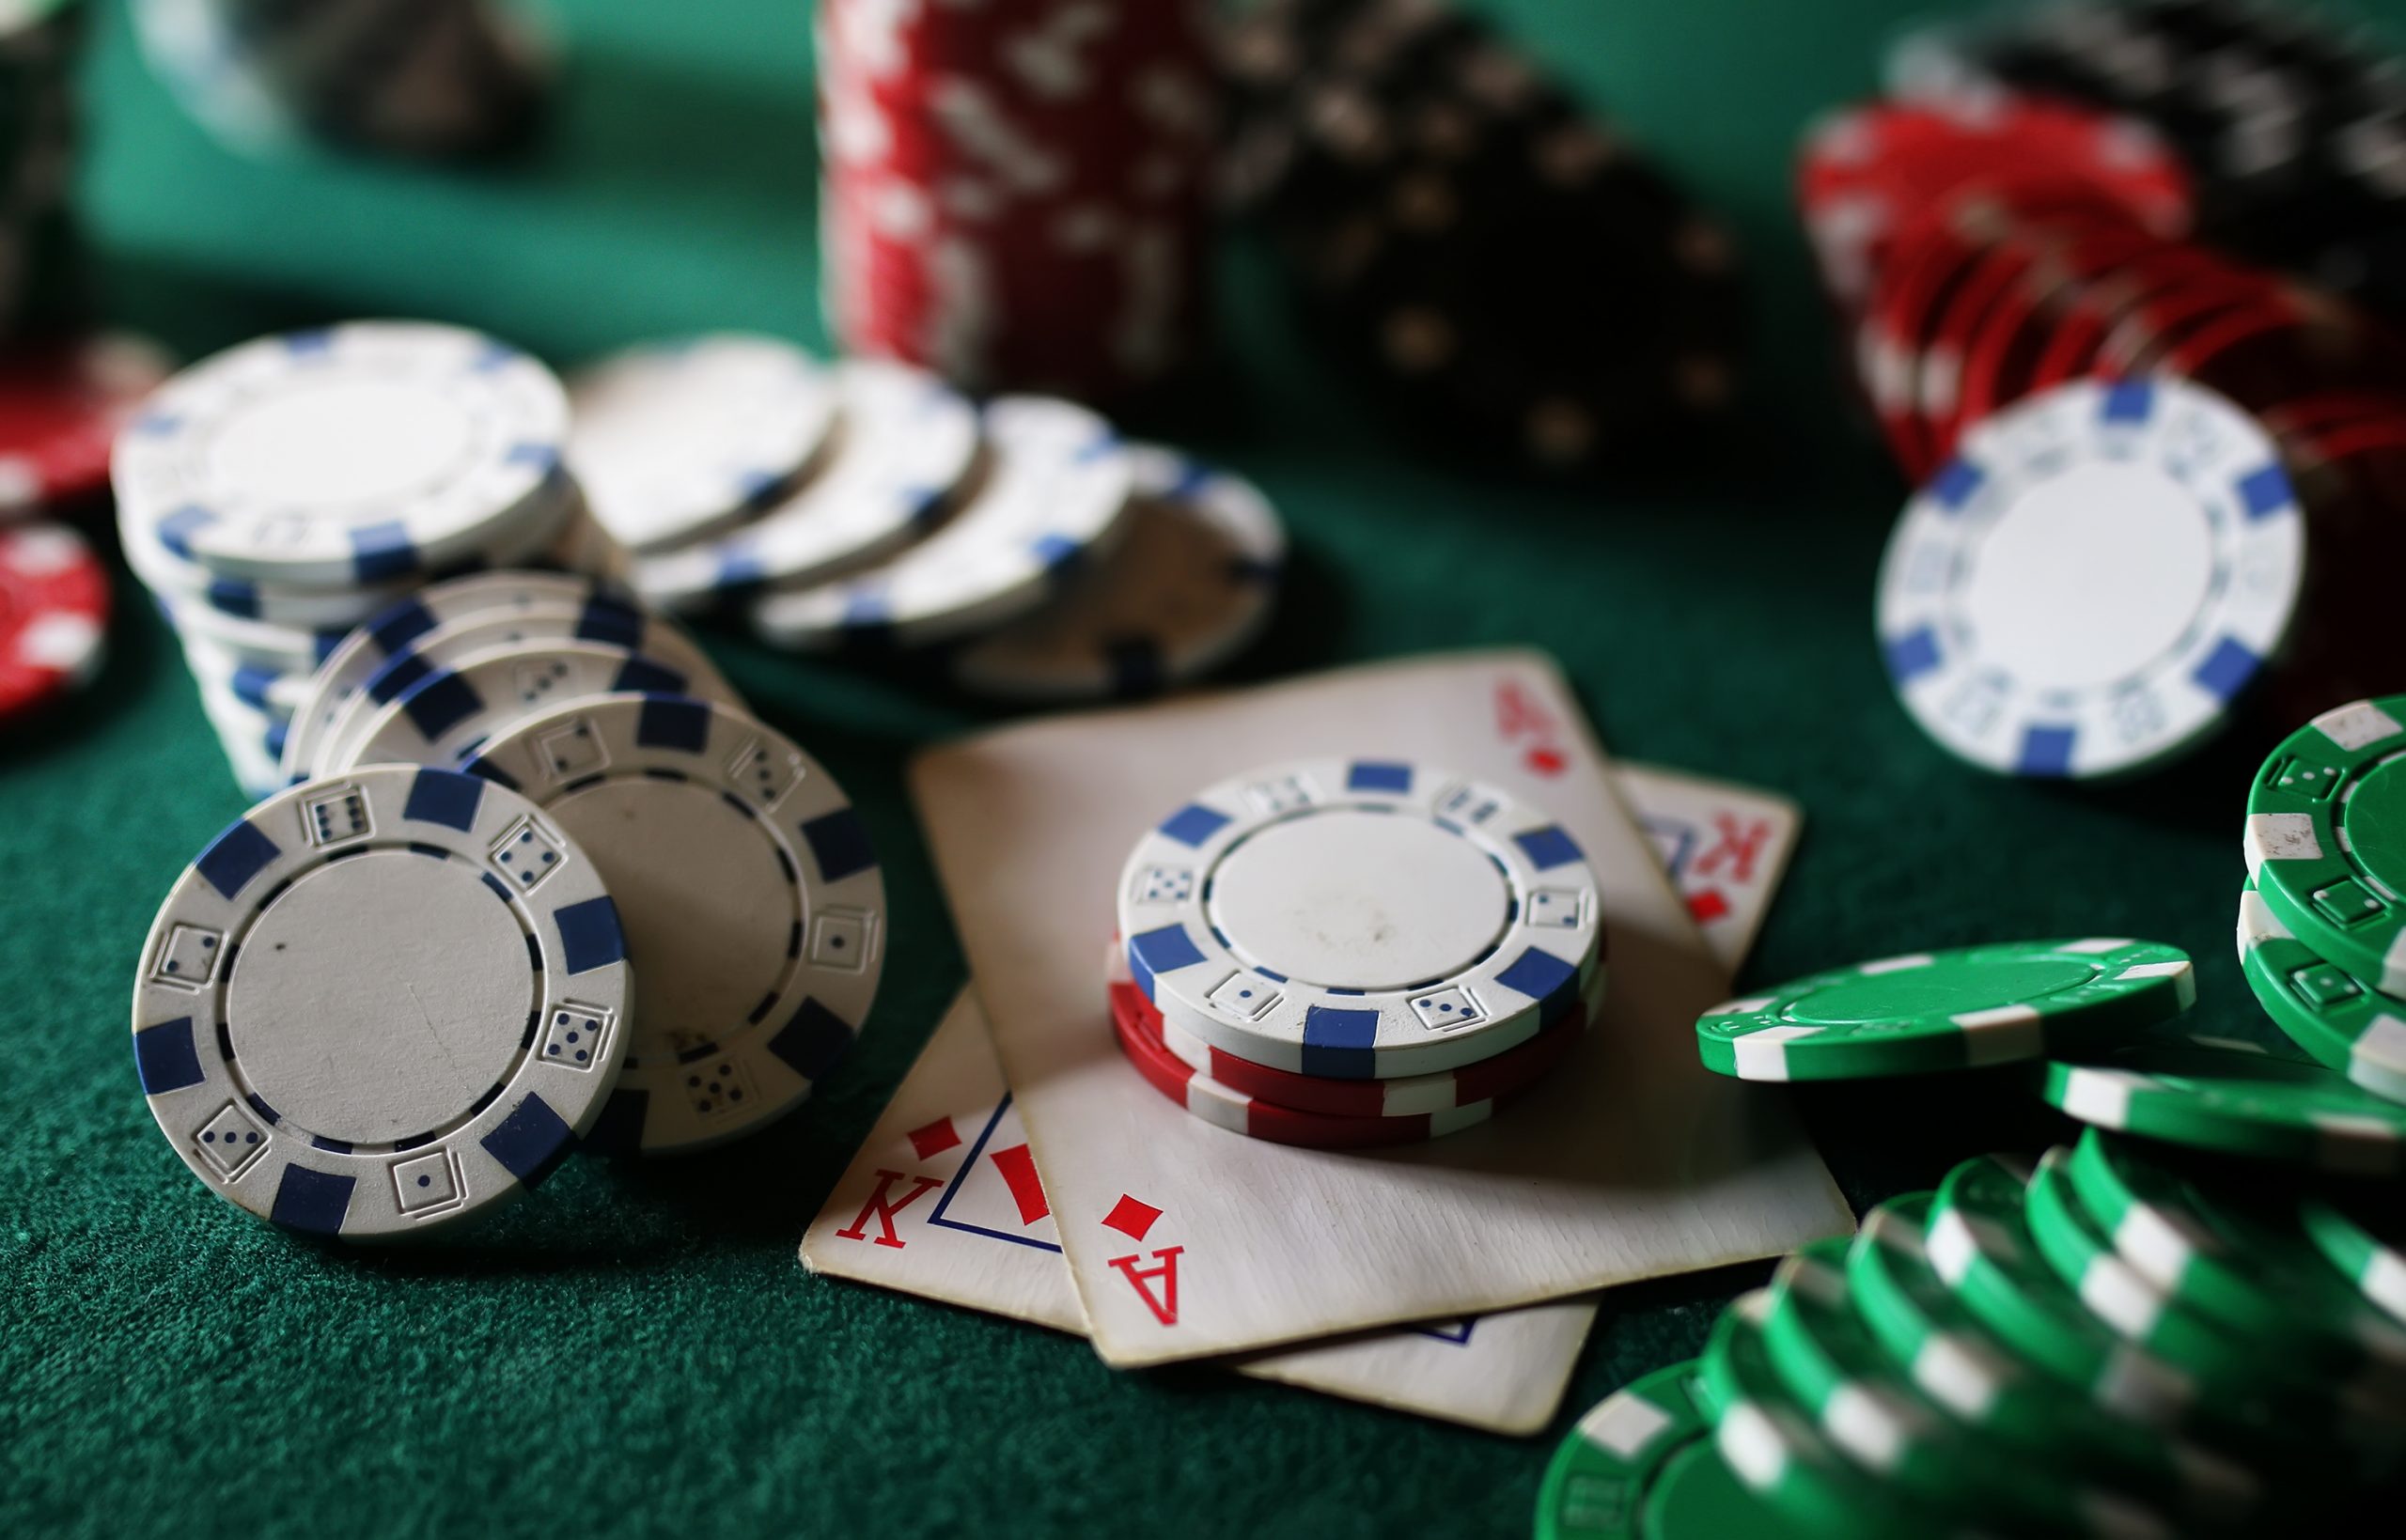 Calculate Payout Ratio Gambling – Check the options